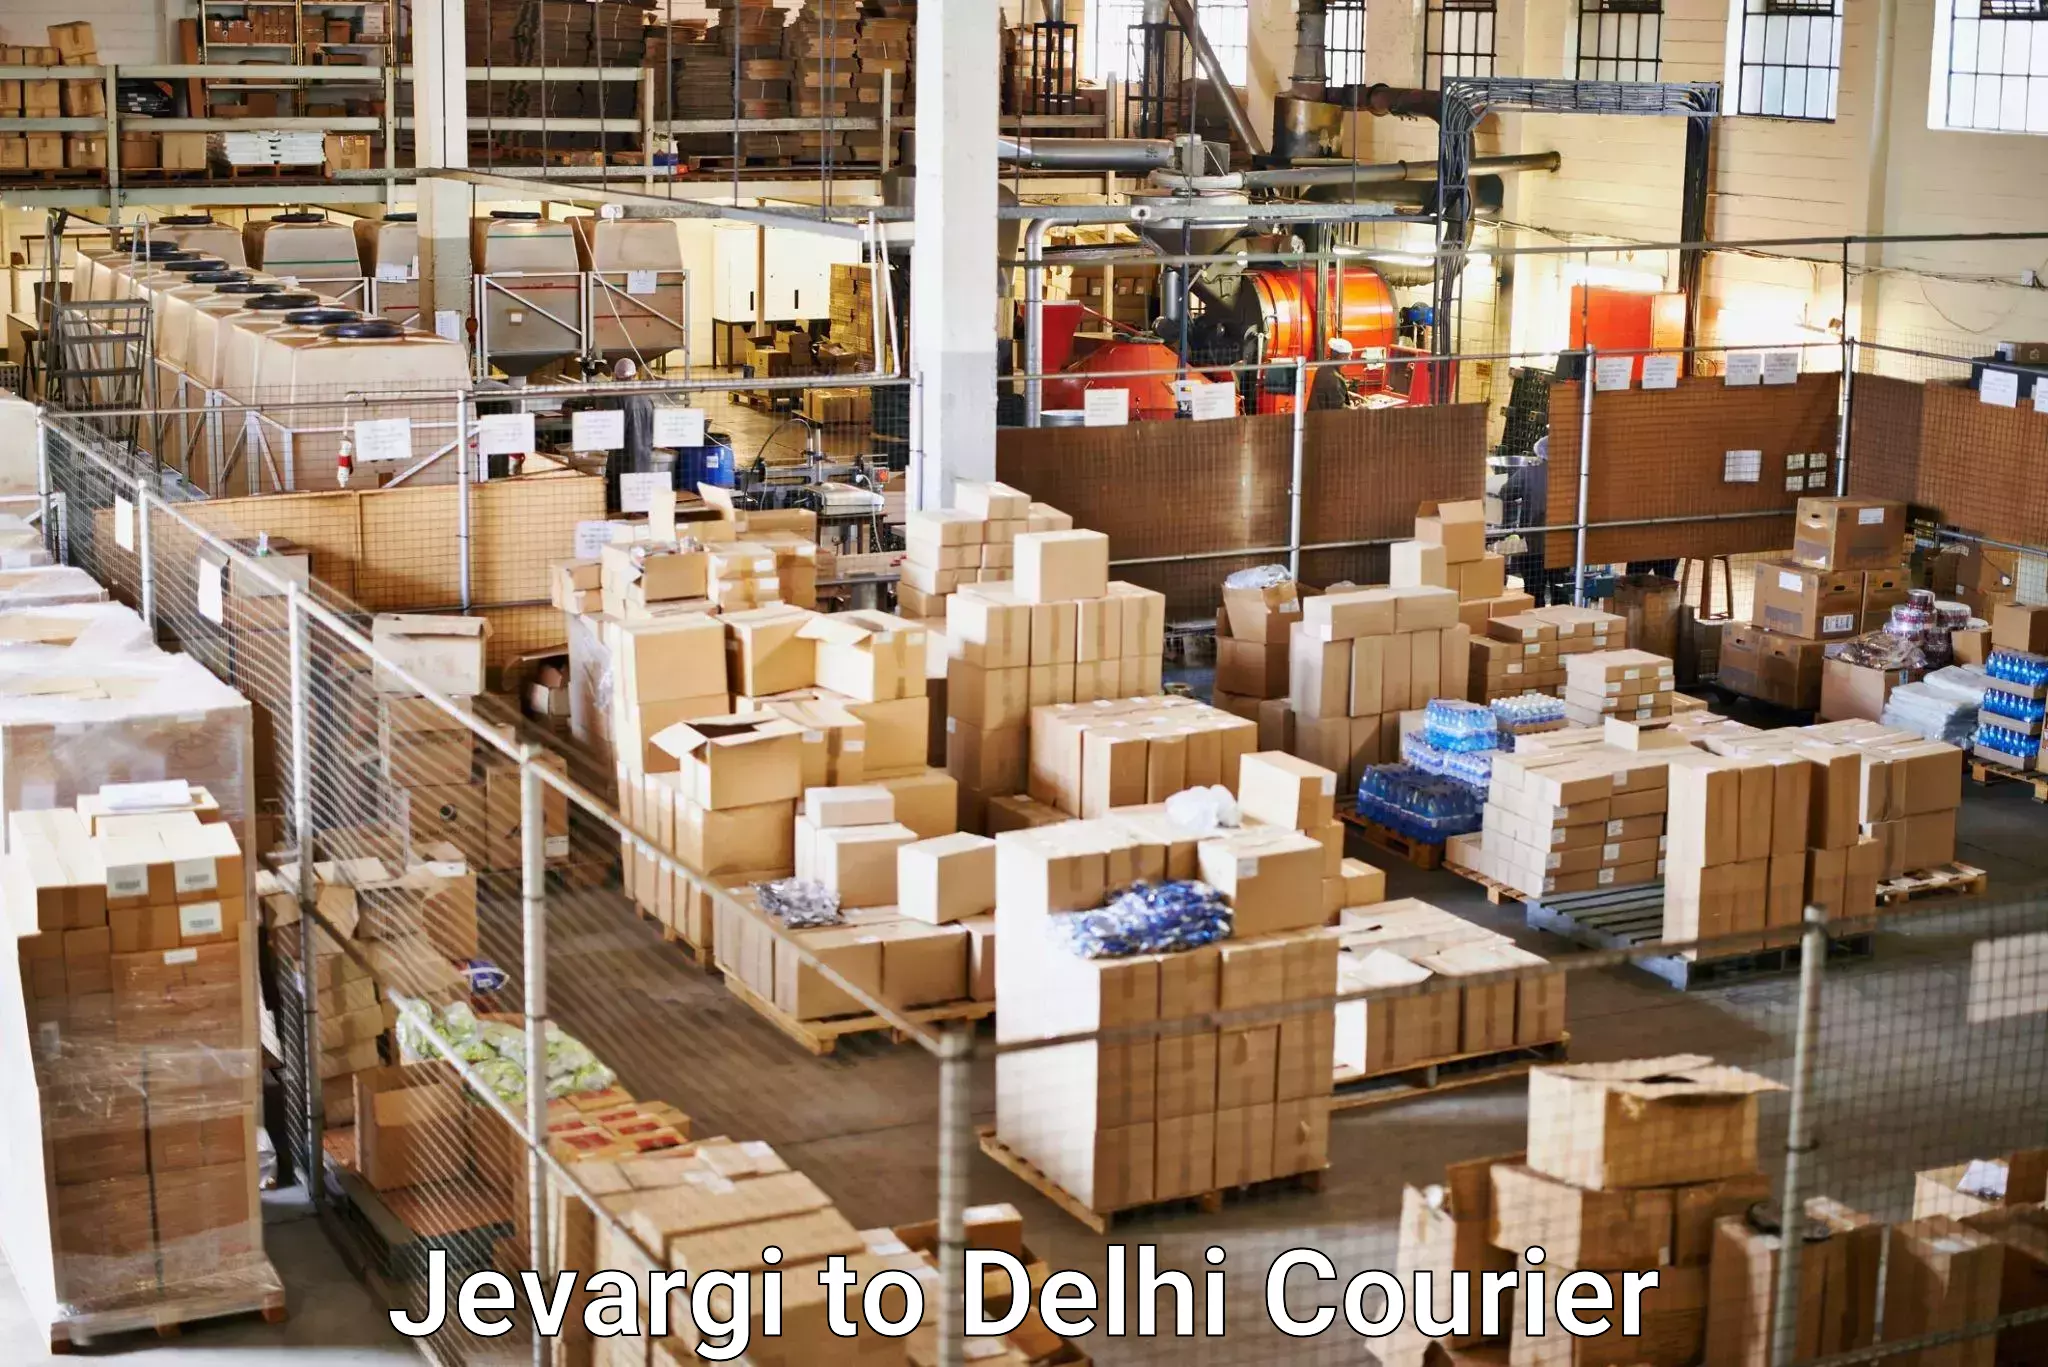 High-speed delivery Jevargi to Lodhi Road